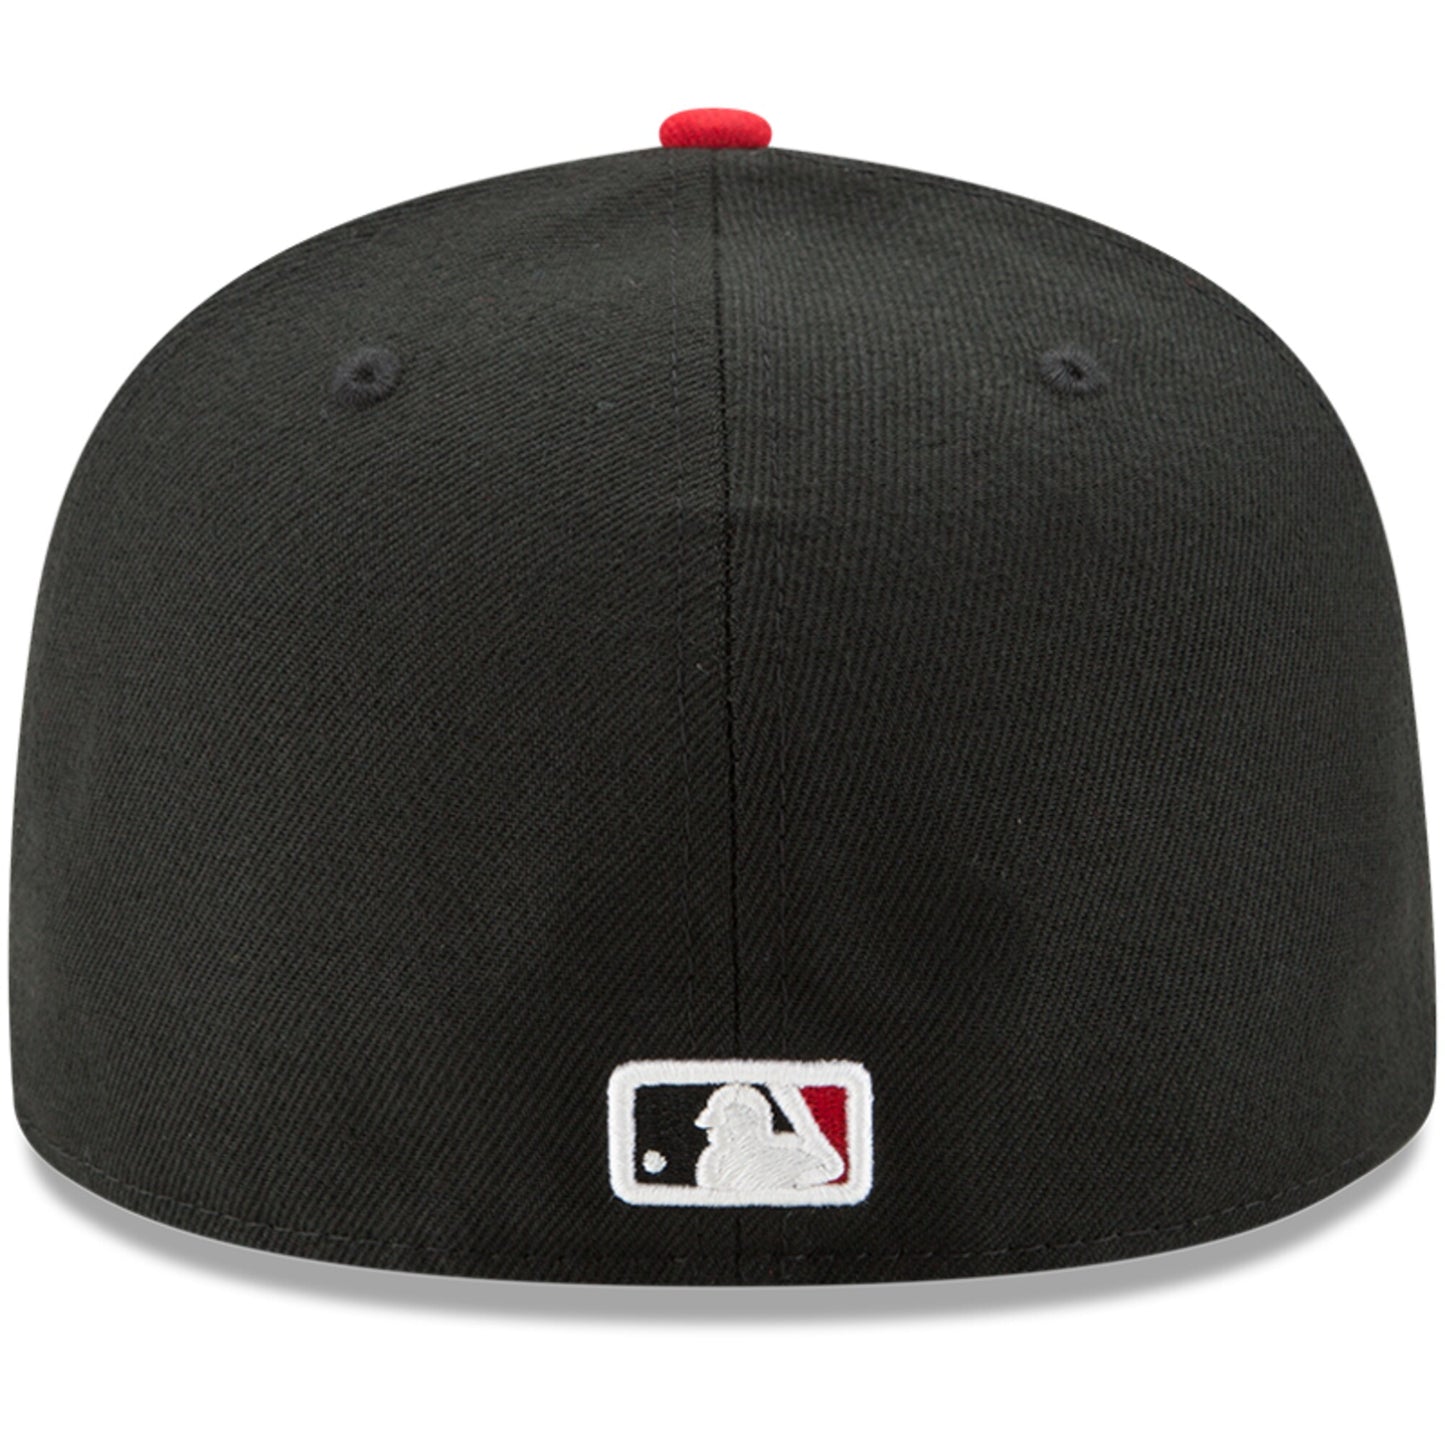 Men's Cincinnati Reds New Era Black/Red Alternate Authentic Collection On-Field 59FIFTY Fitted Hat